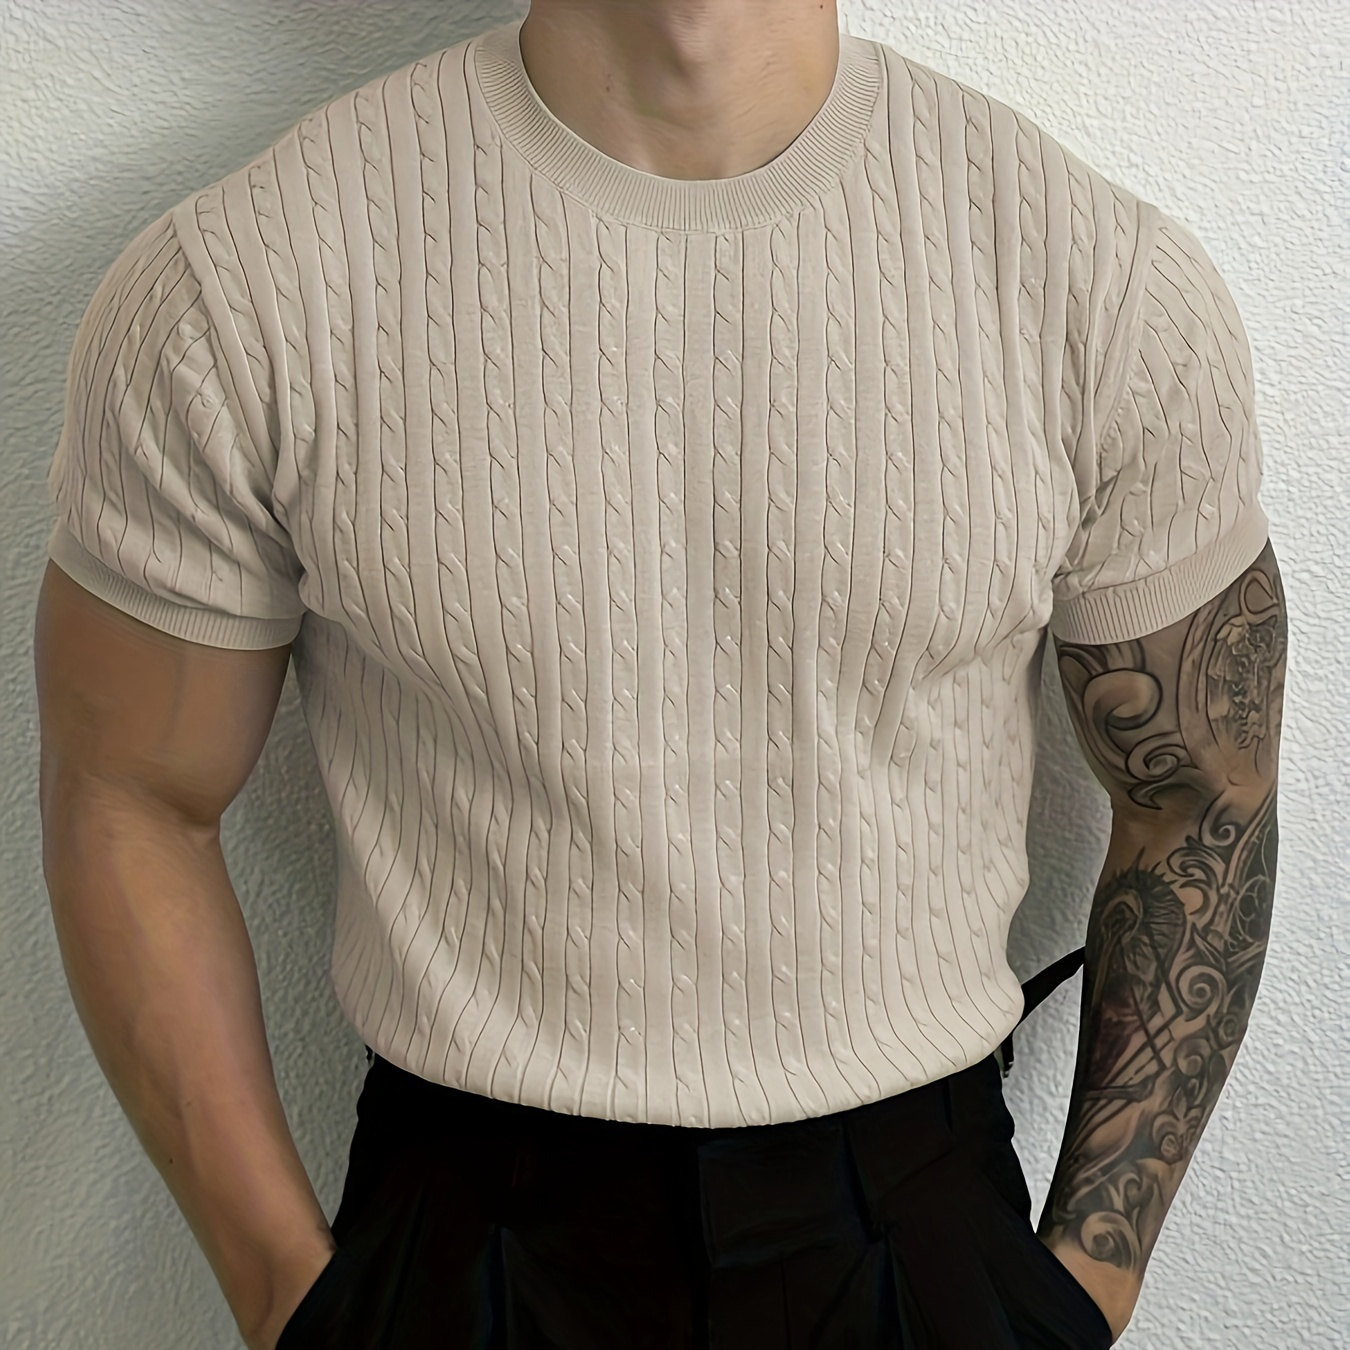 

Men's Ribbed And Textured Knit Crew Neck And Short Sleeve T-shirt, Casual And Chic Summer Tops For Daily And Outdoors Leisurewear